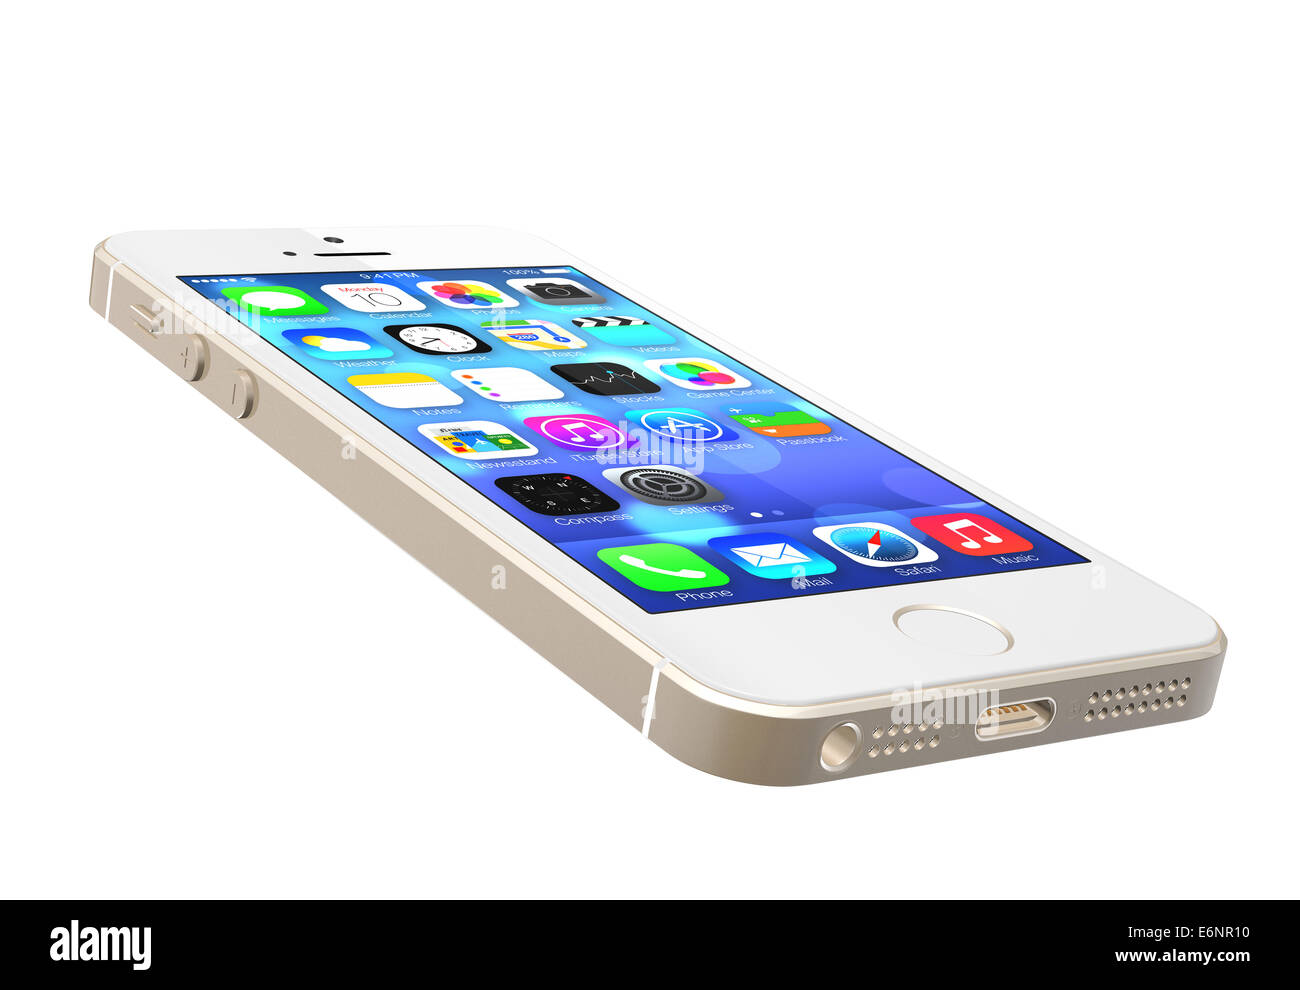 Gold iPhone 5s showing the home screen with iOS7. Stock Photo